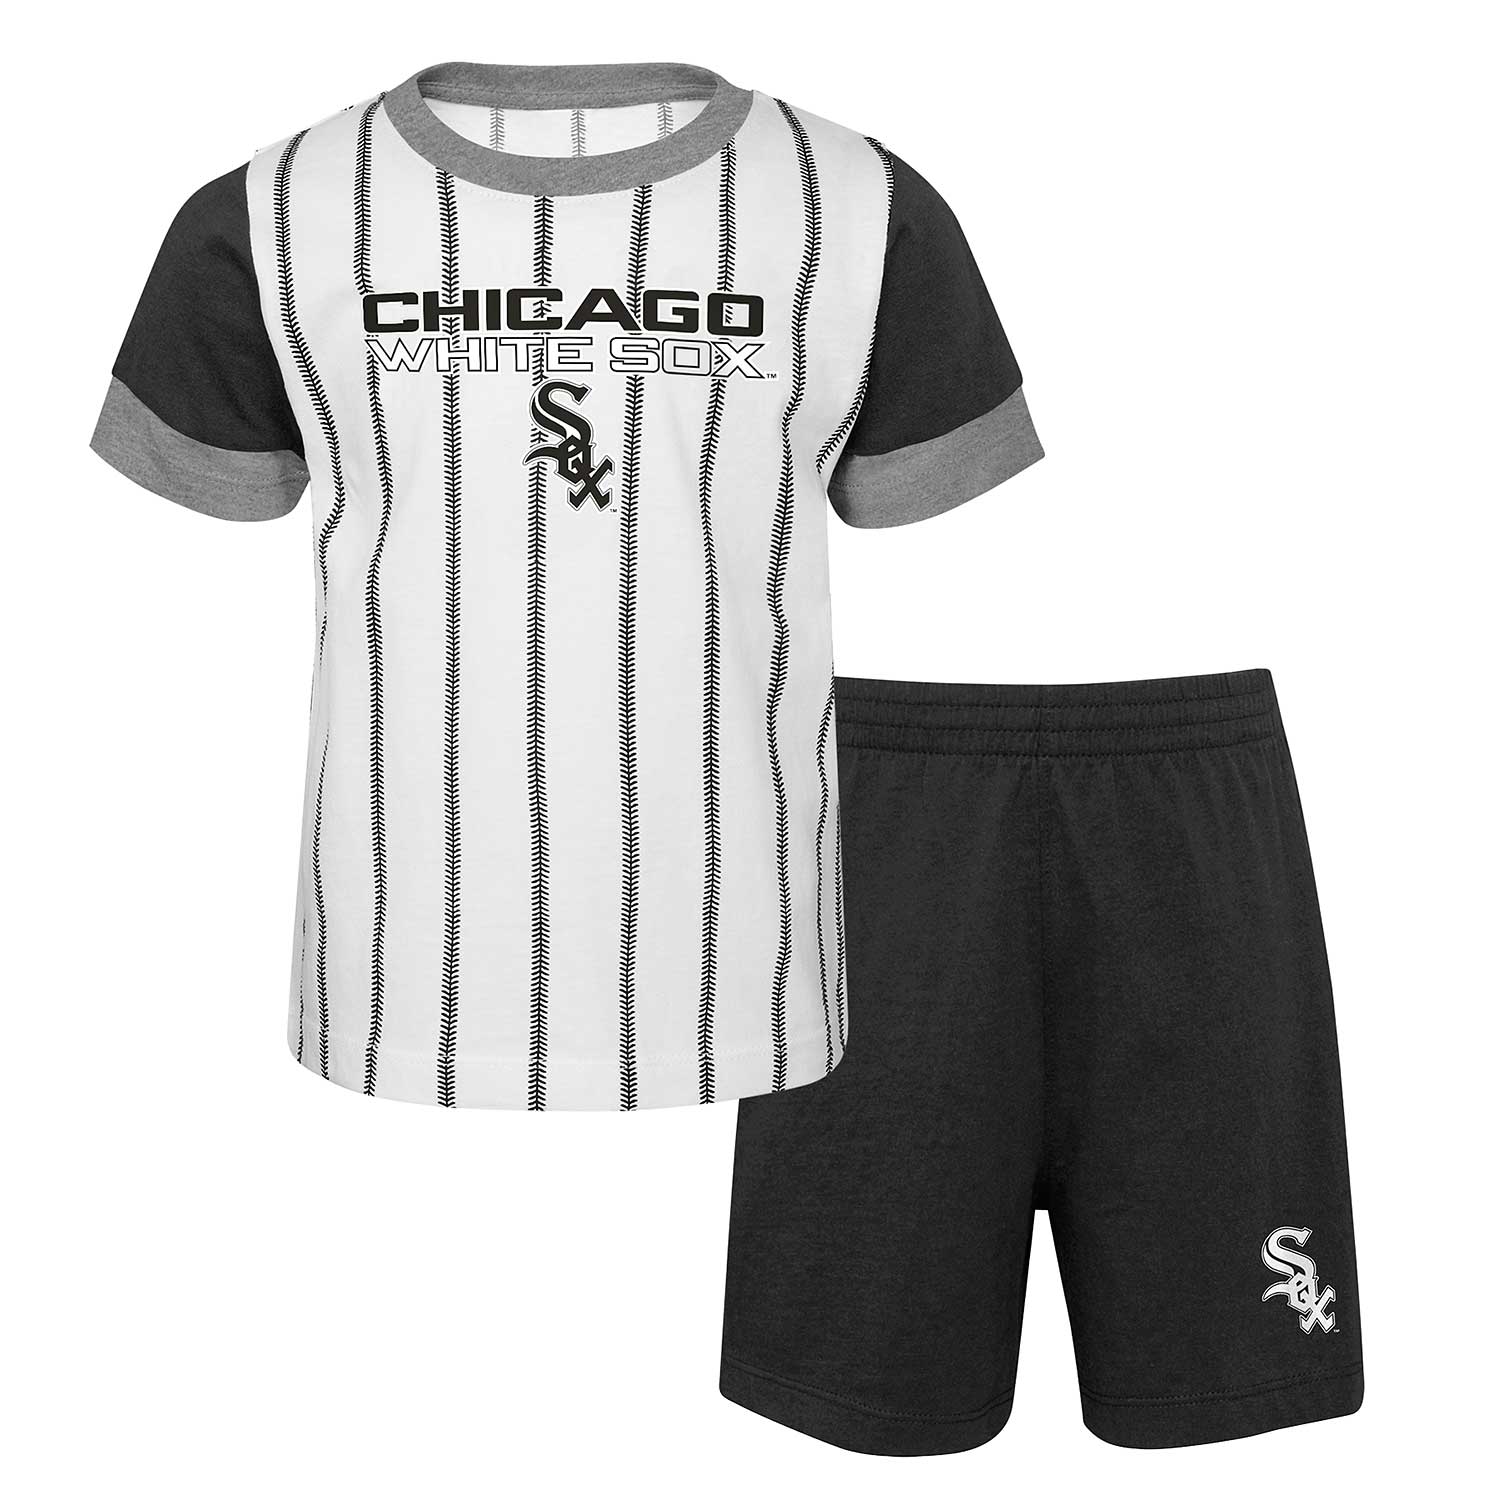 The Story Behind The Chicago White Sox 'Shorts' Uniforms